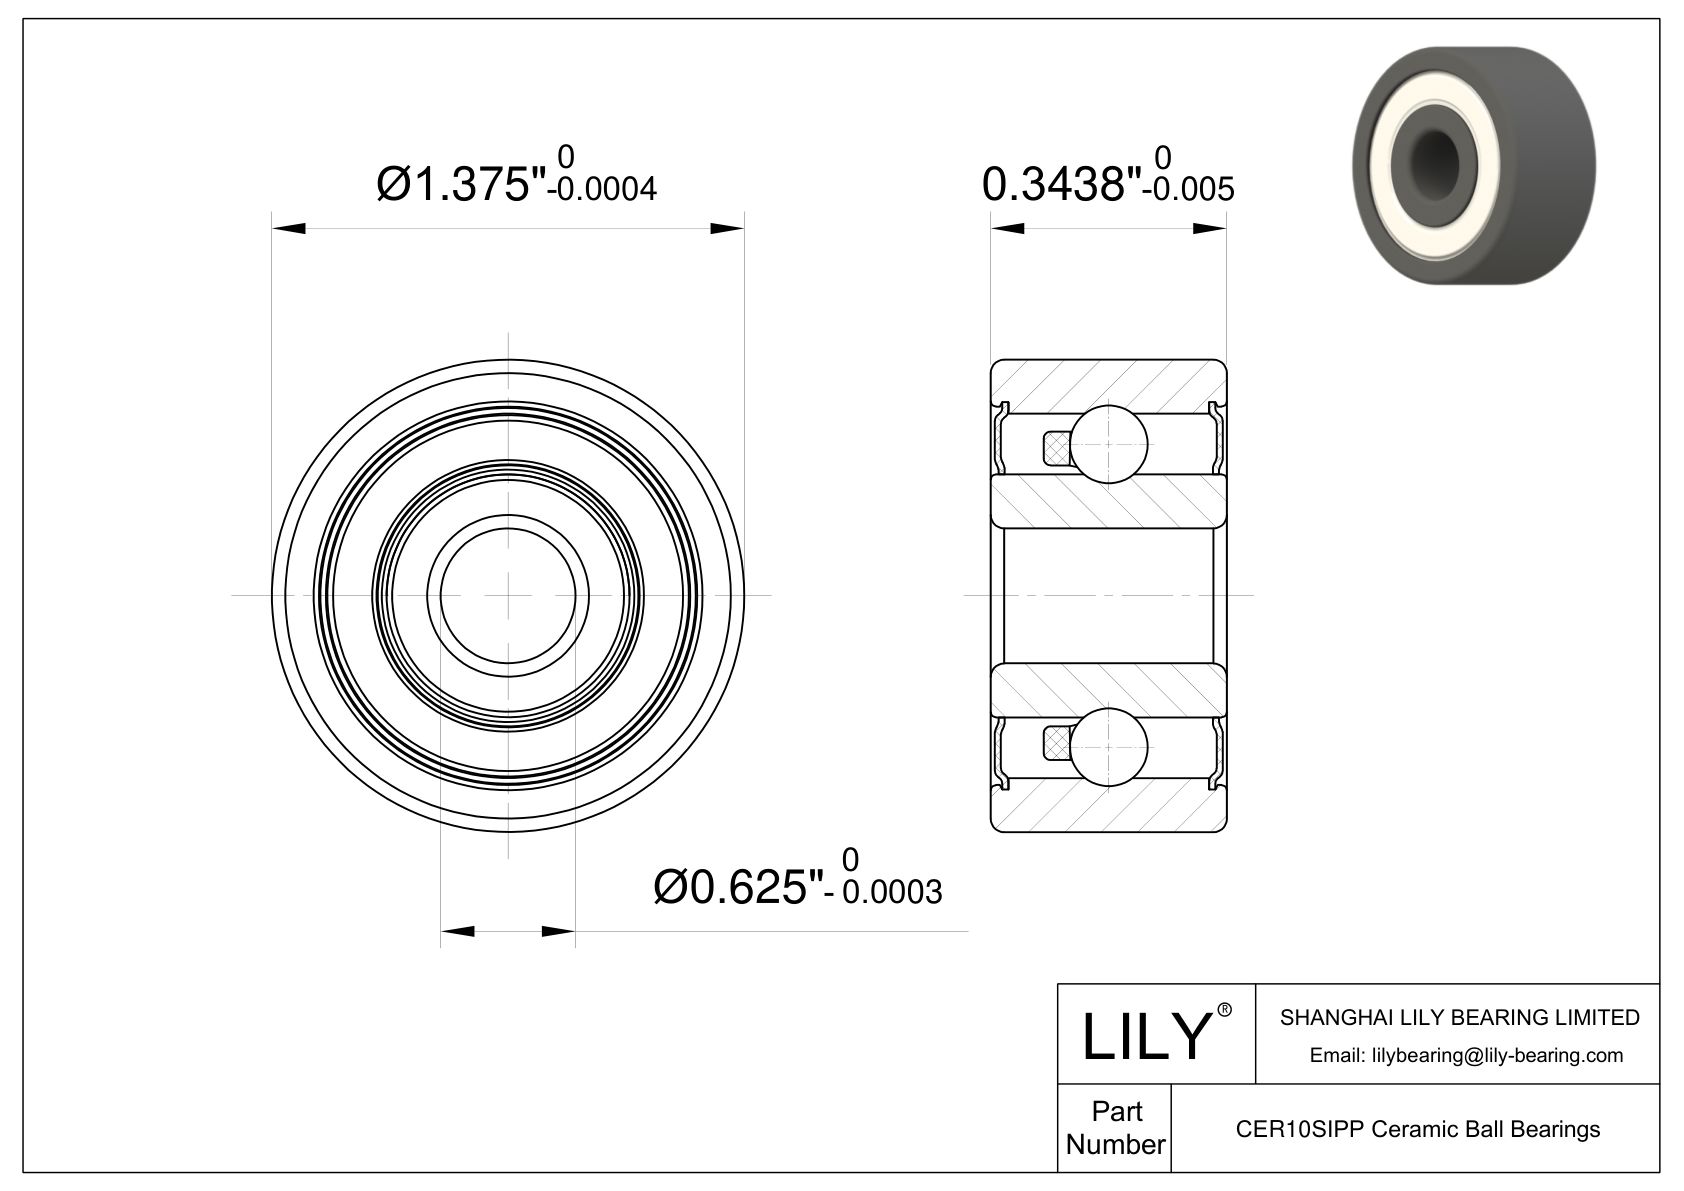 CESI R10 2RS Inch Size Silicon Nitride Ceramic Bearings CAD图形